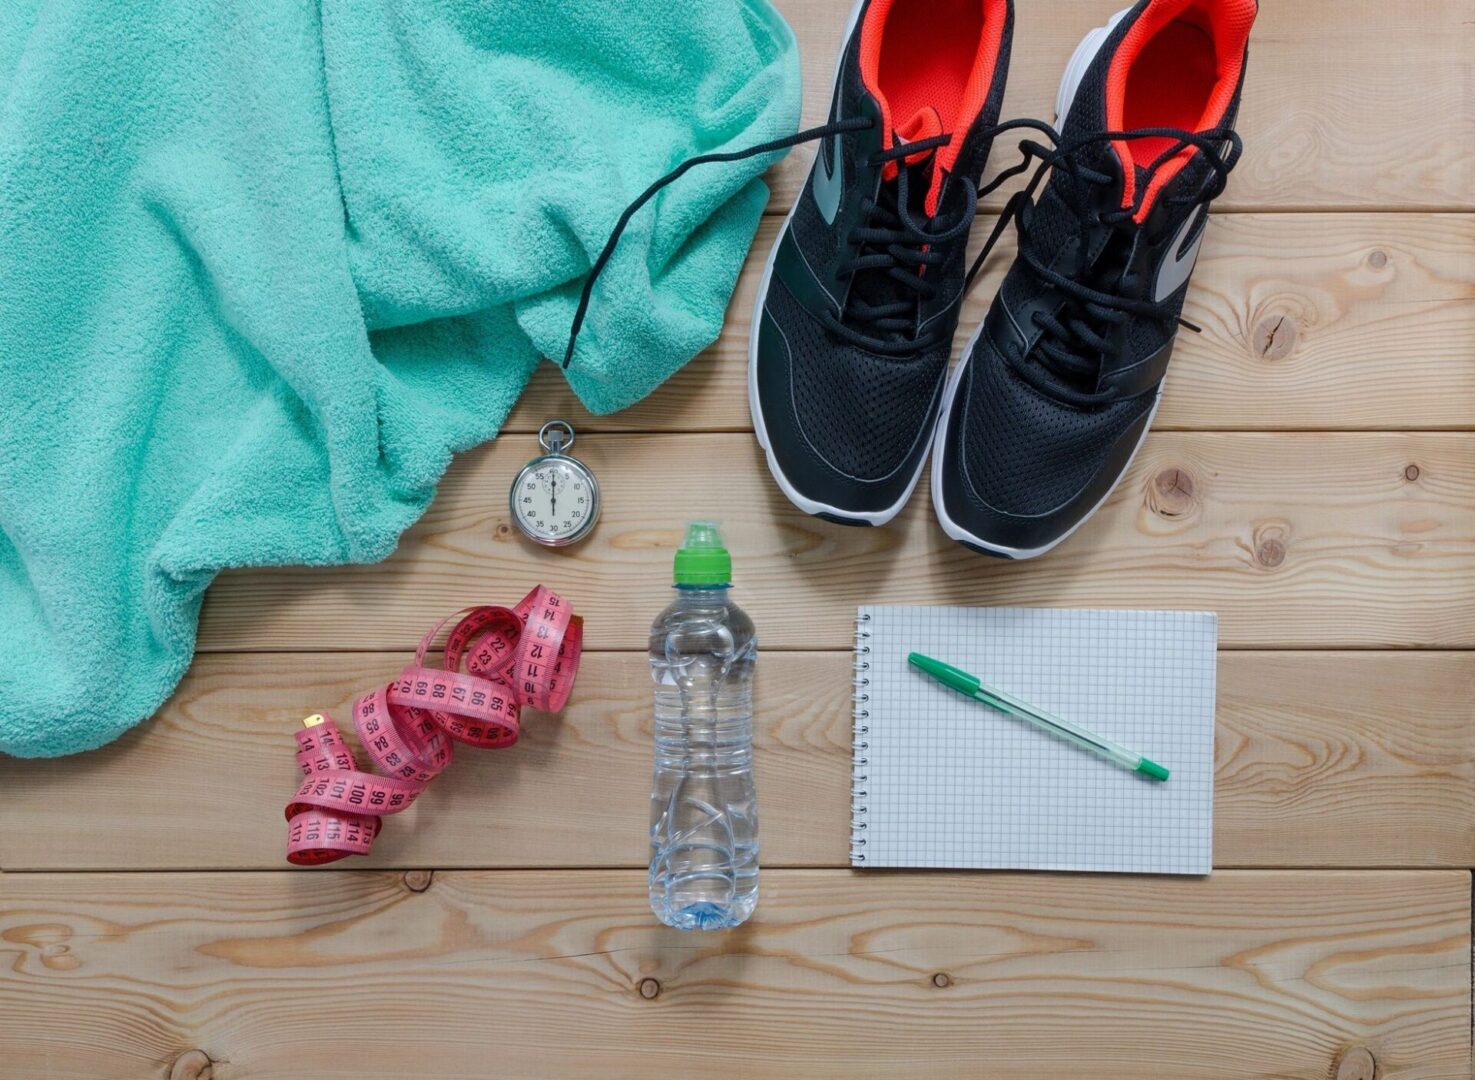 shoes, water bottle, note pad, a tape, clock. towel